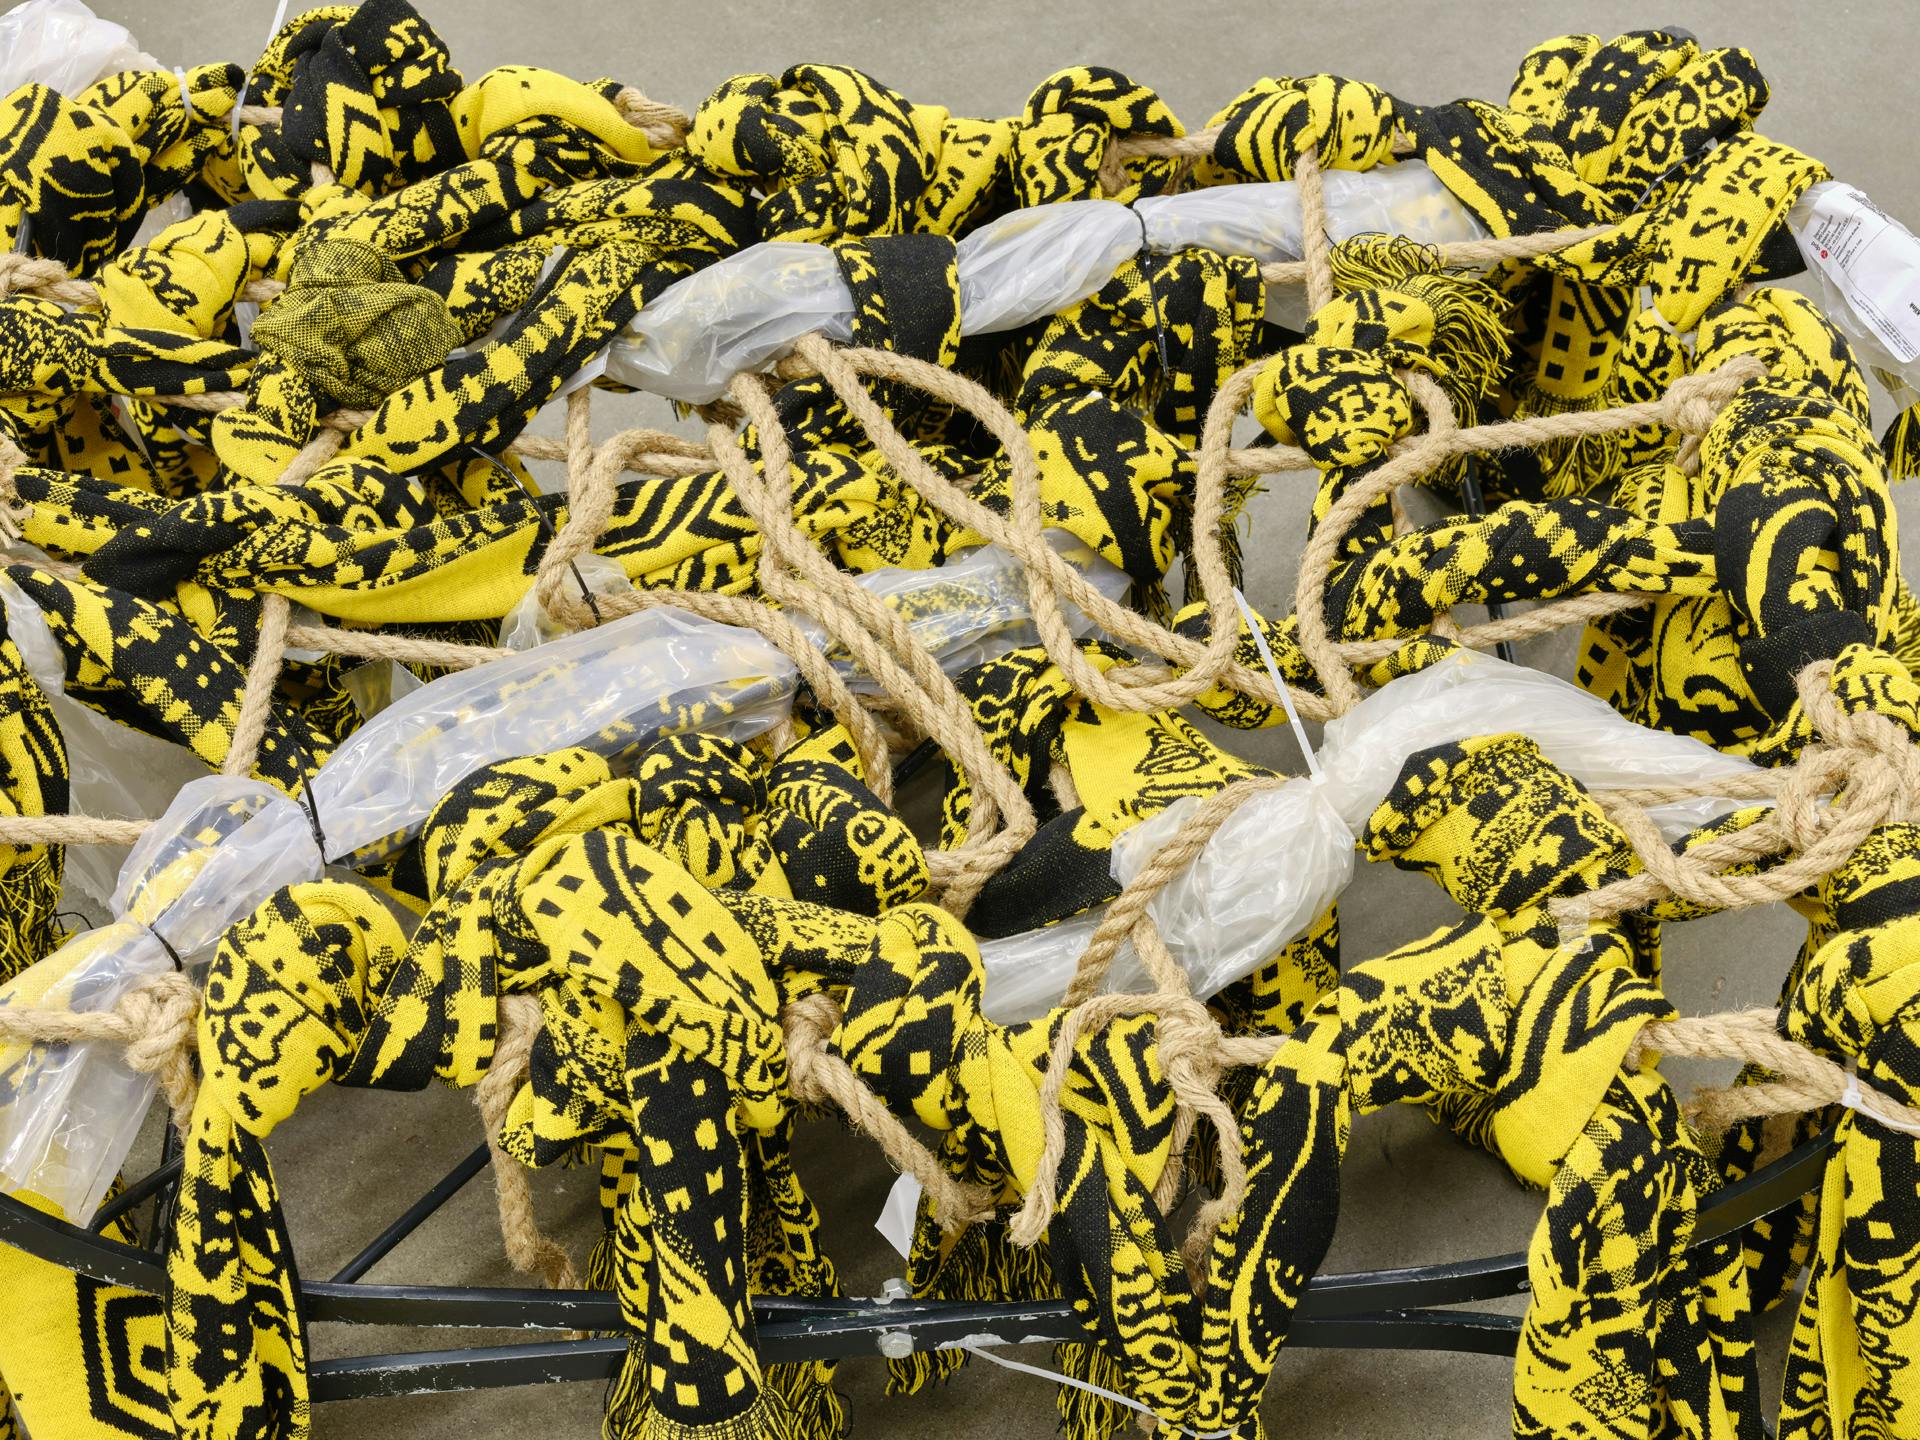 A close view of a sculpture made of yellow and black scarves, brown rope and scraps of plastic packaging tied in knots and draped over a metal seat-like structure. 